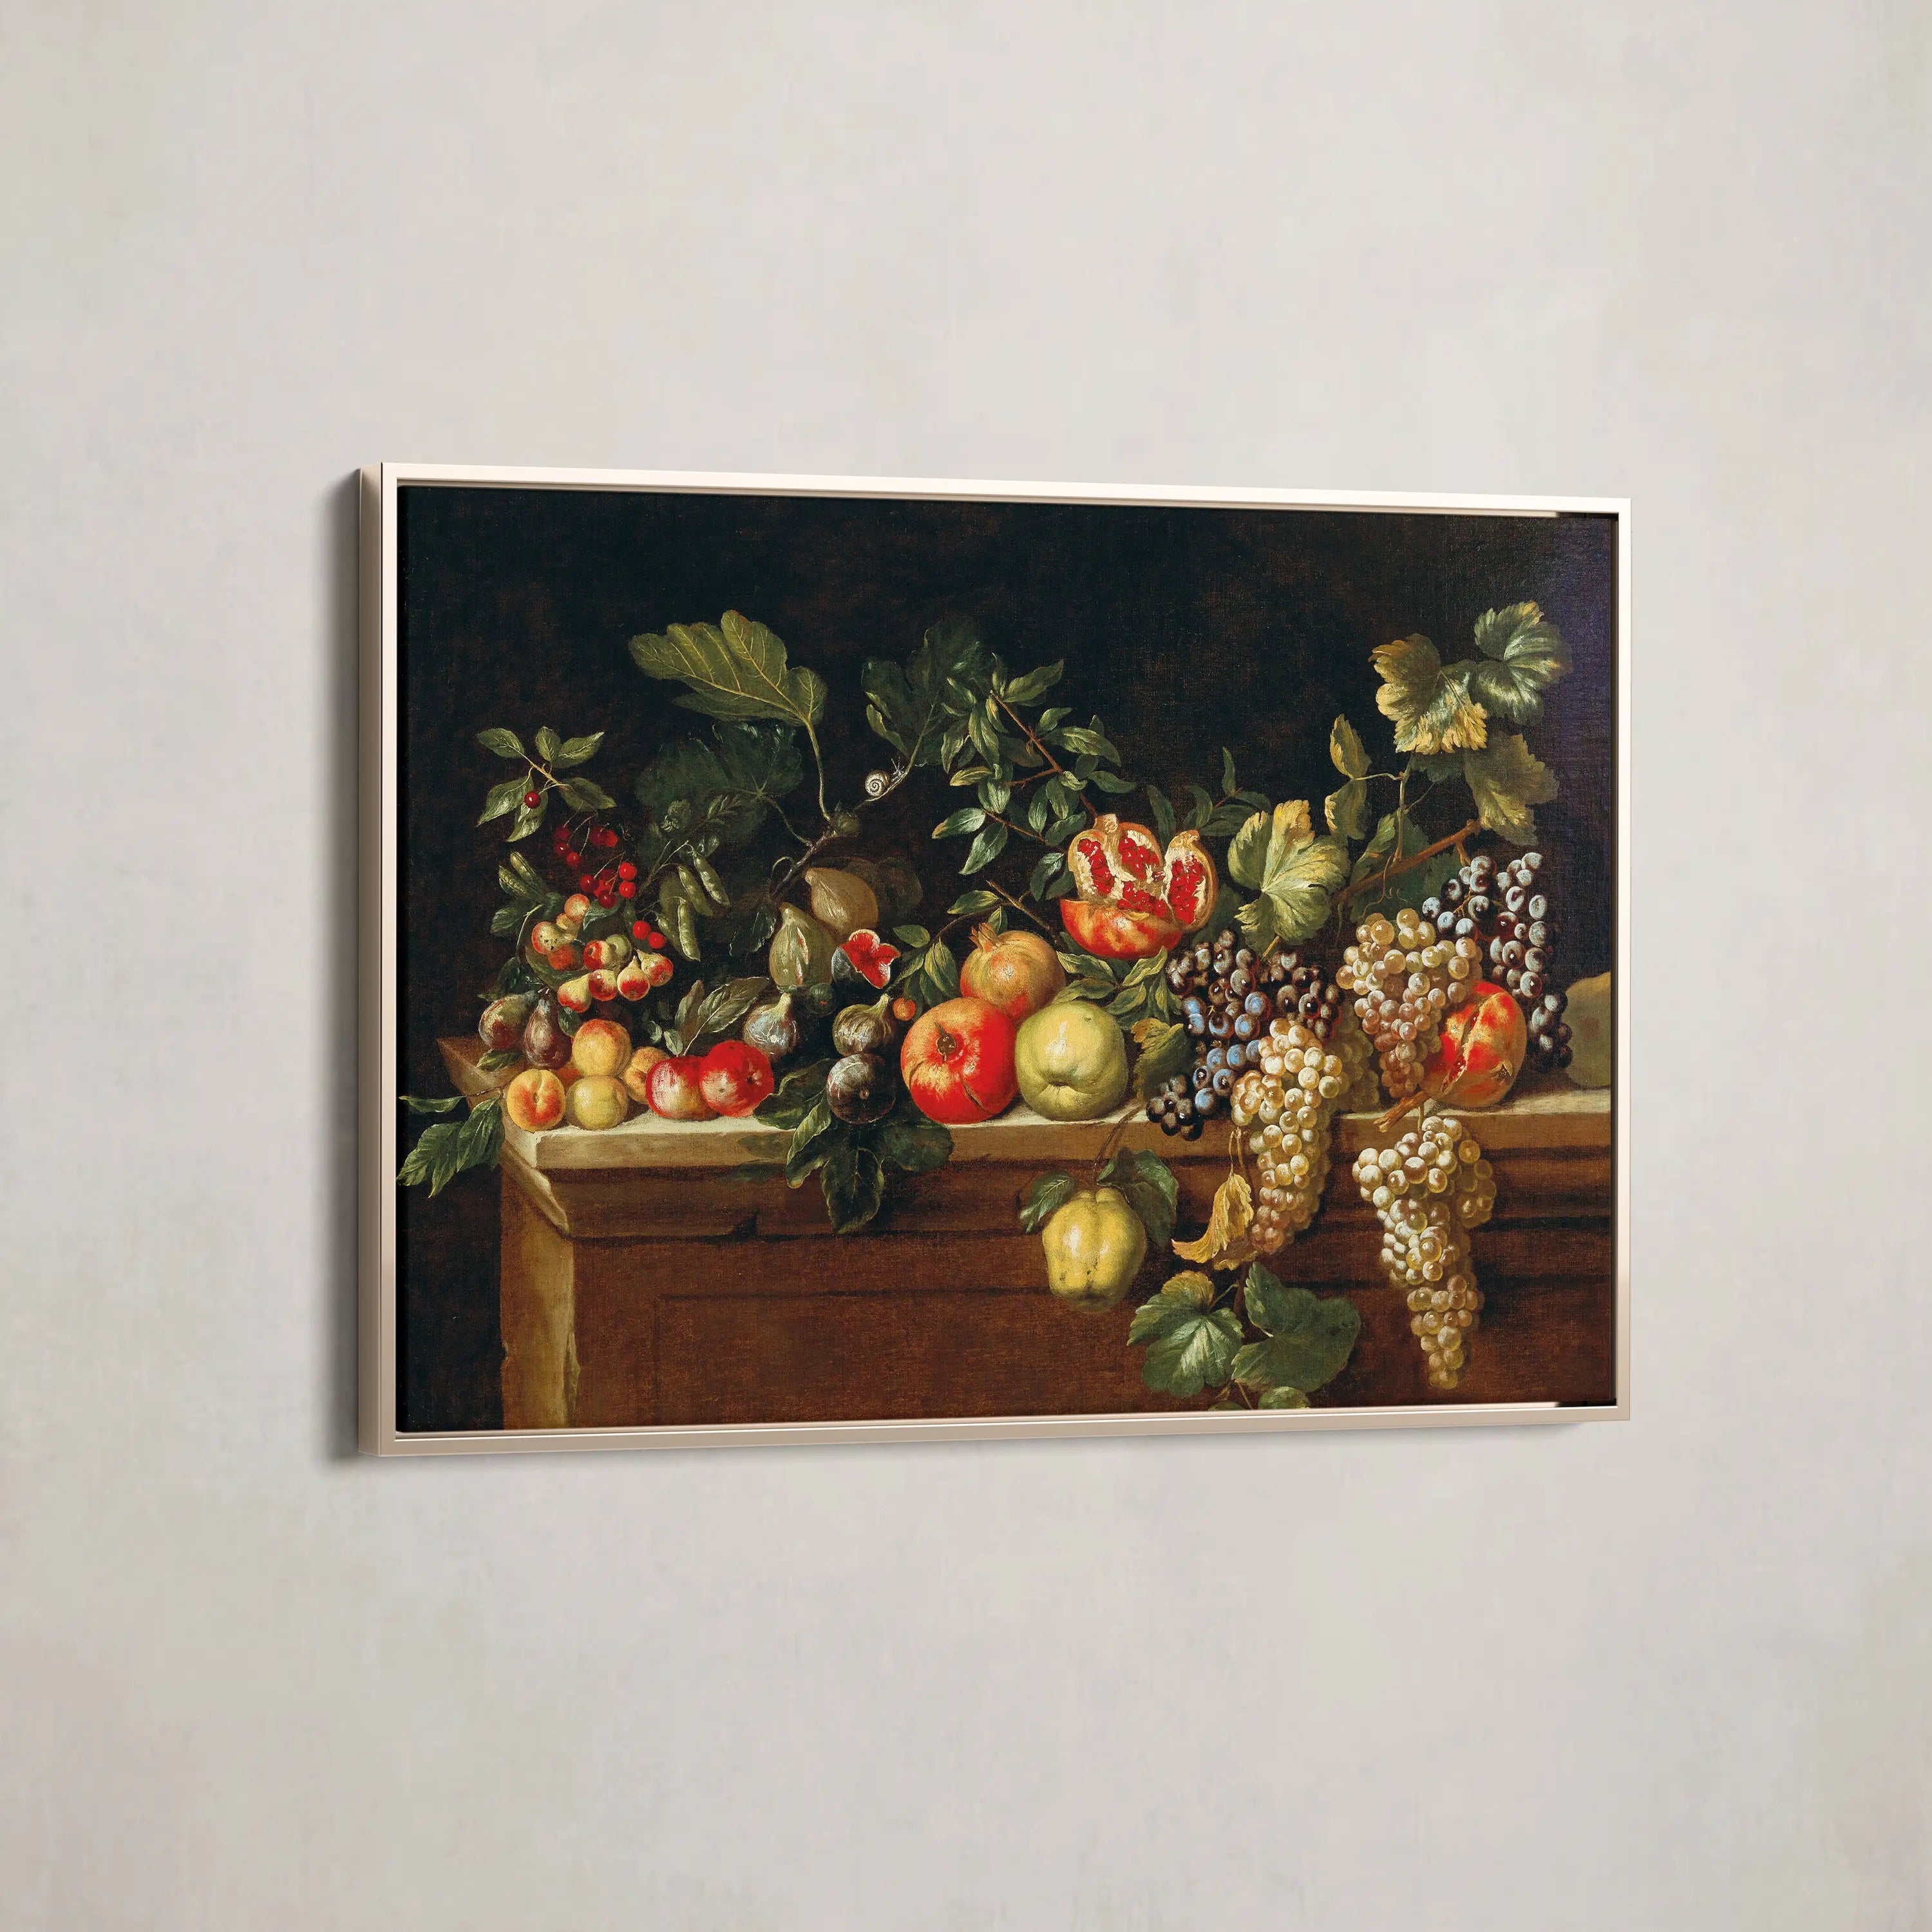 Apples, grapes, figs and pomegranates and other fruit on a ledge by Agostino Verrocchio